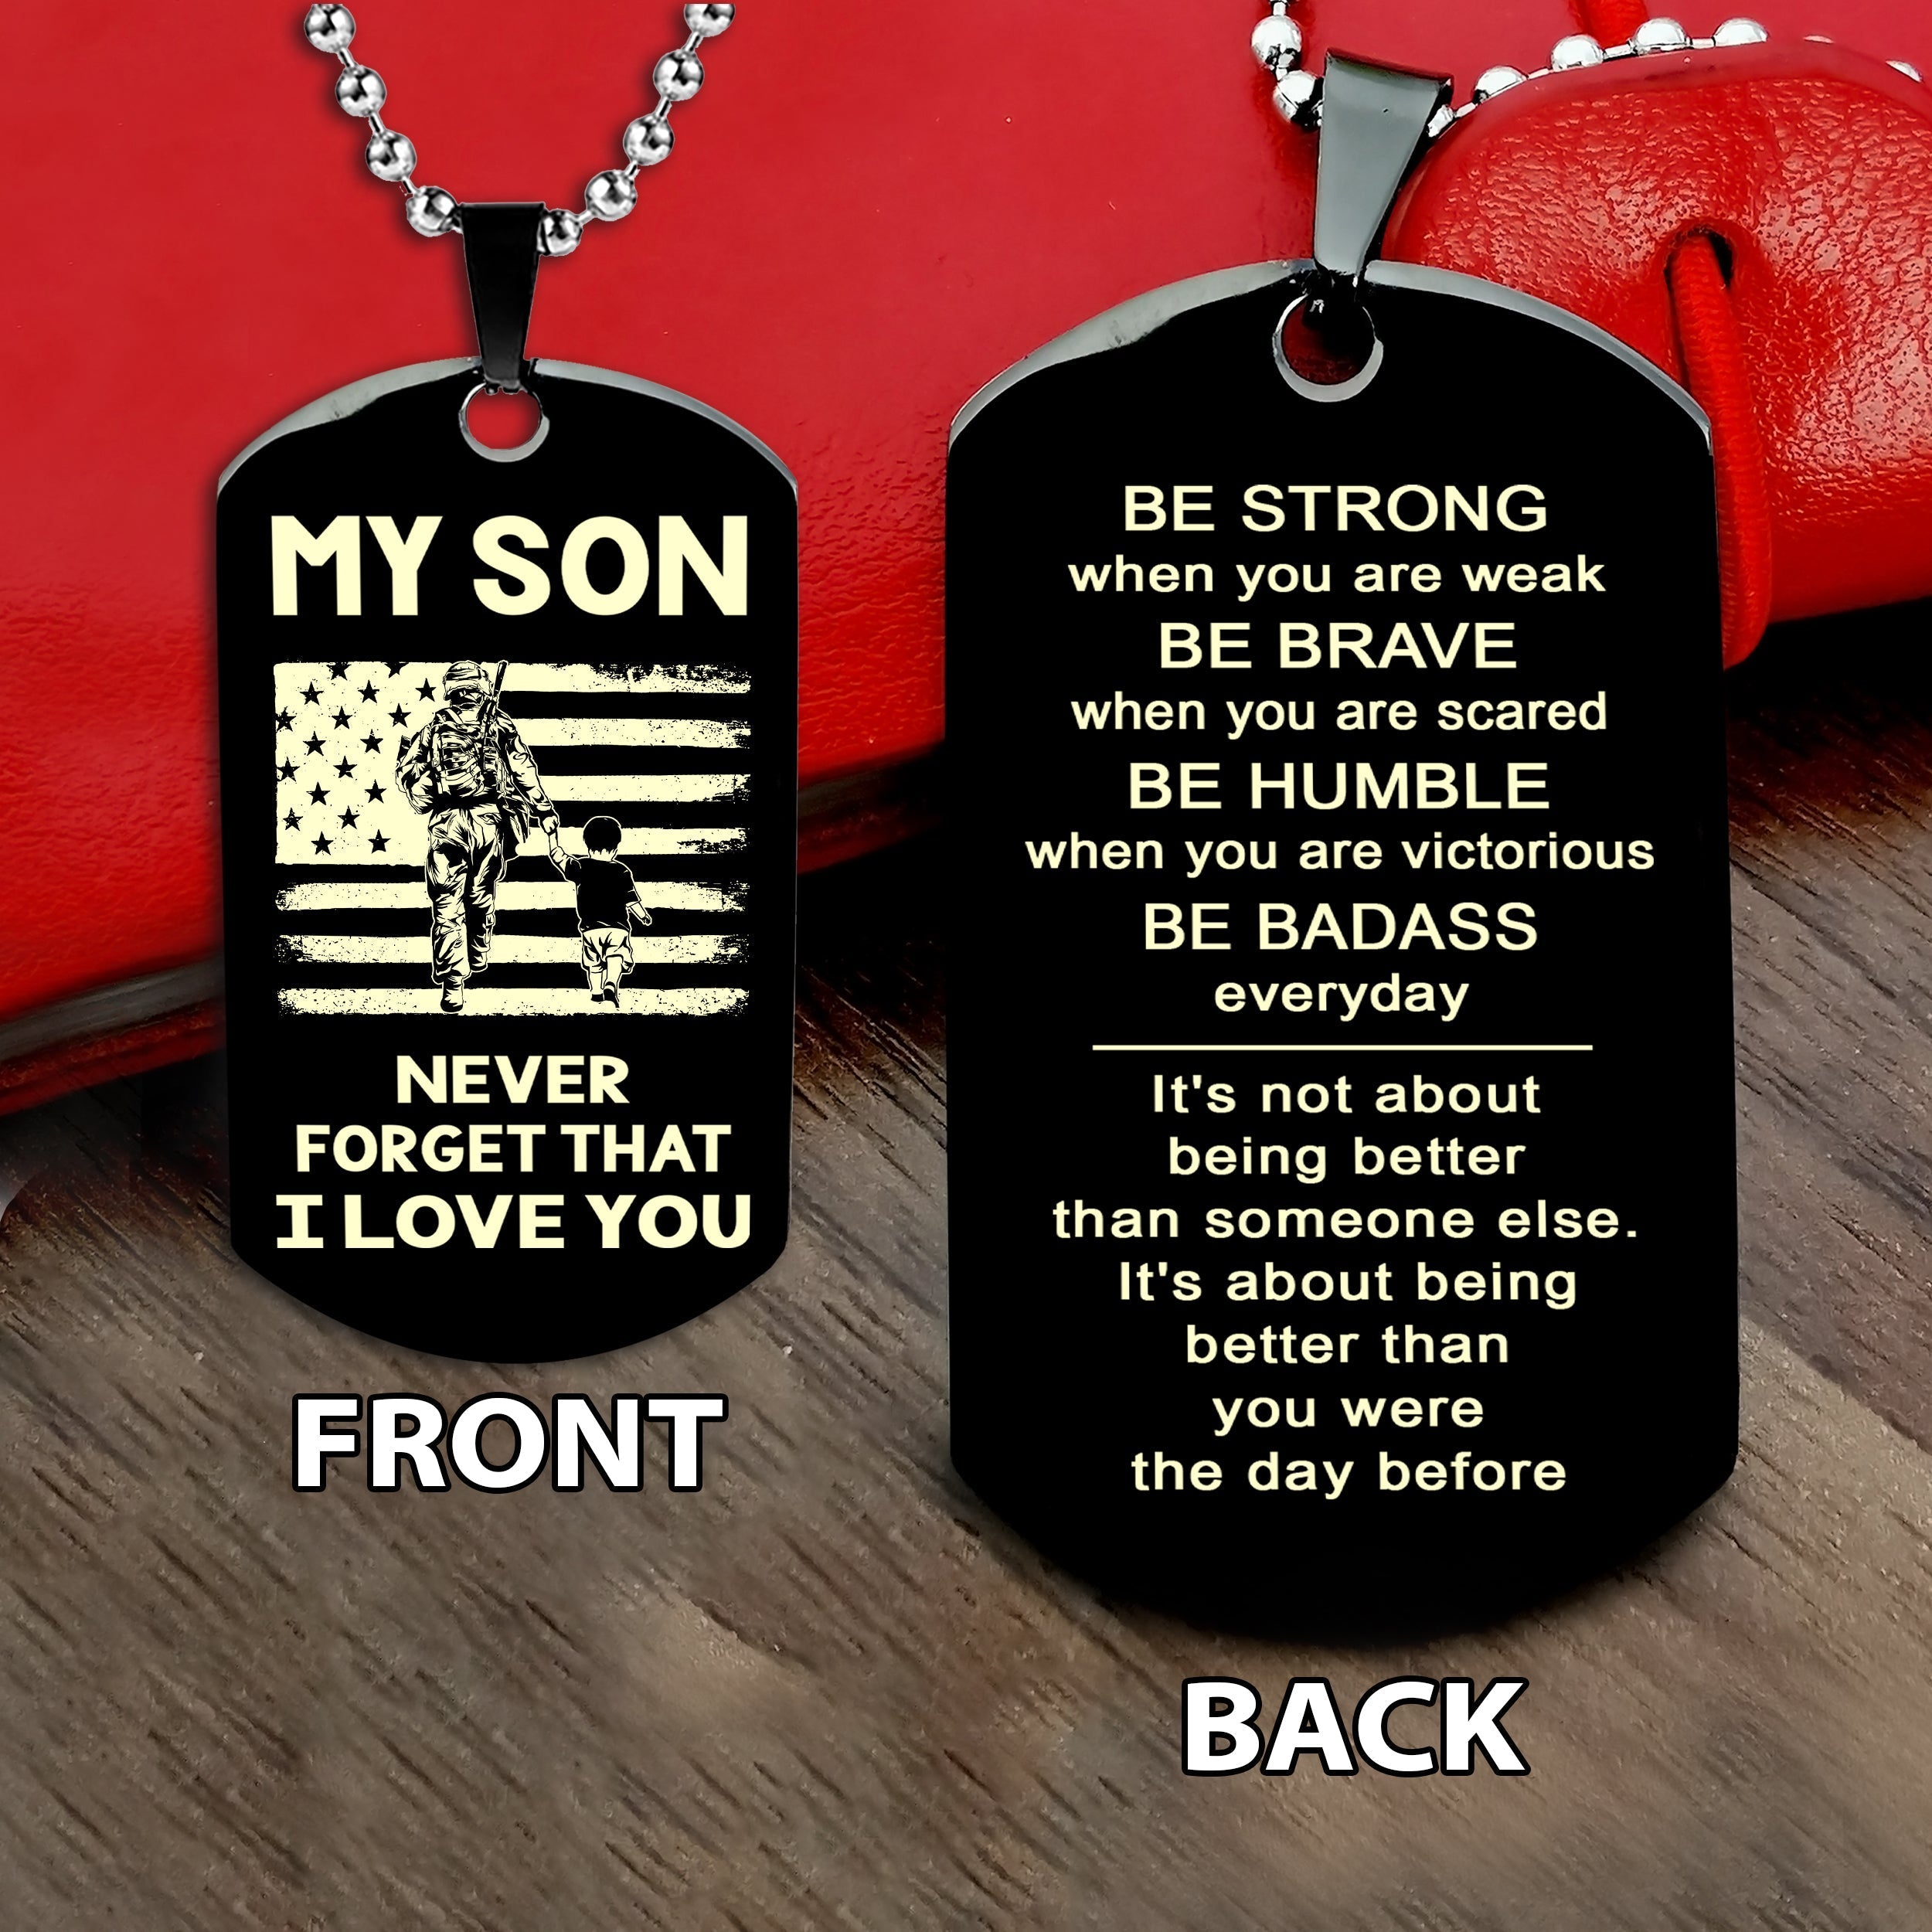 Soldier customizable engraved double sided dog tag gifts from dad mom to son, Be strong be brave be humble, It is not about better than someone else, It is about being better than you were the day before